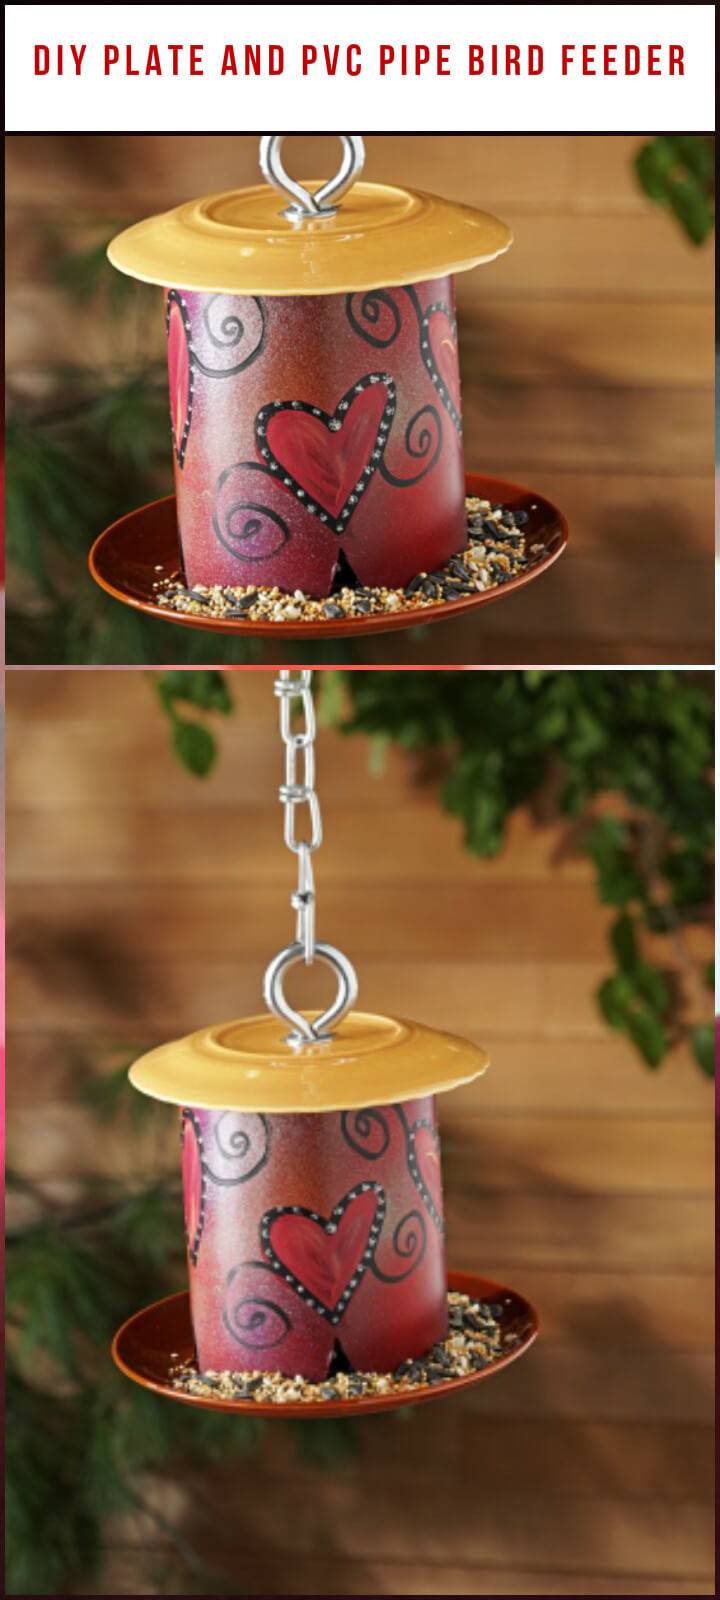 old plate and PVC pipe bird feeder